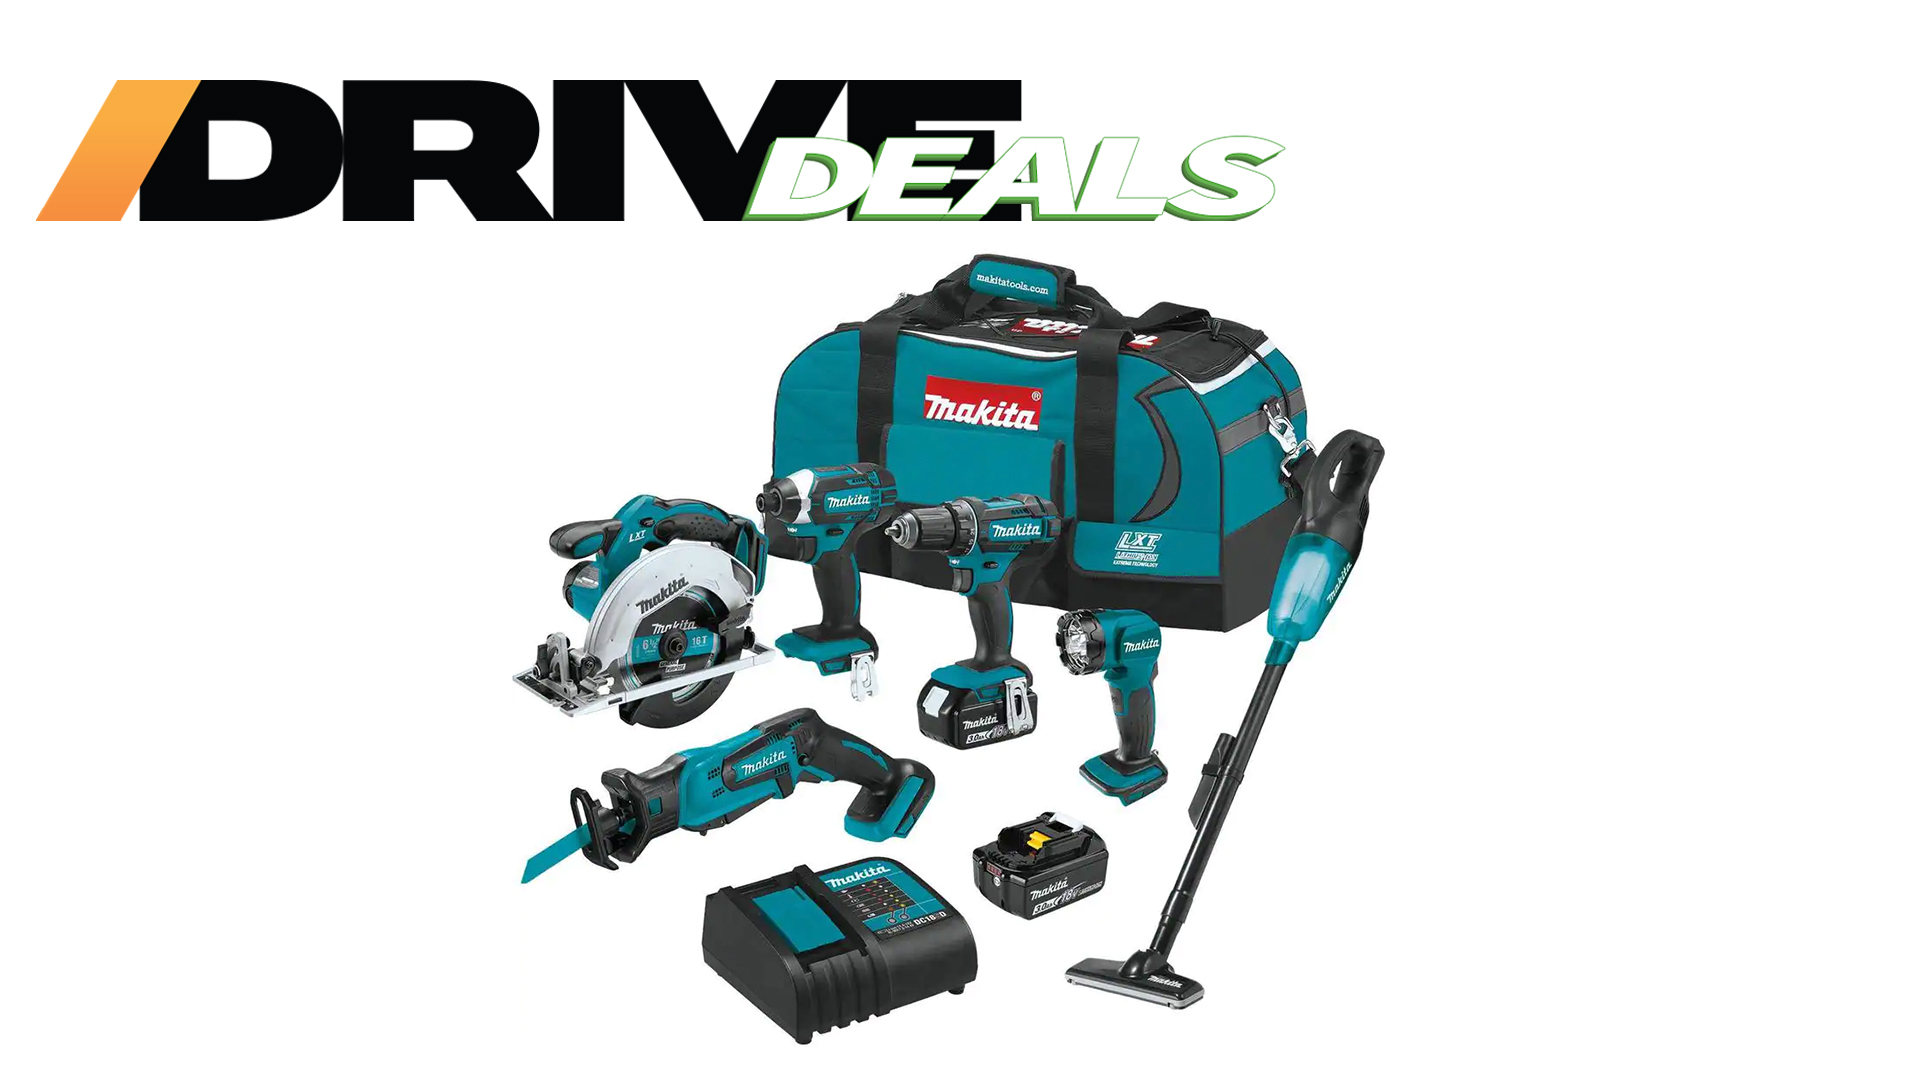 Tag telefonen Legeme Jobtilbud Get Up to Two Free Tools With Home Depot's Makita Black Friday Deals